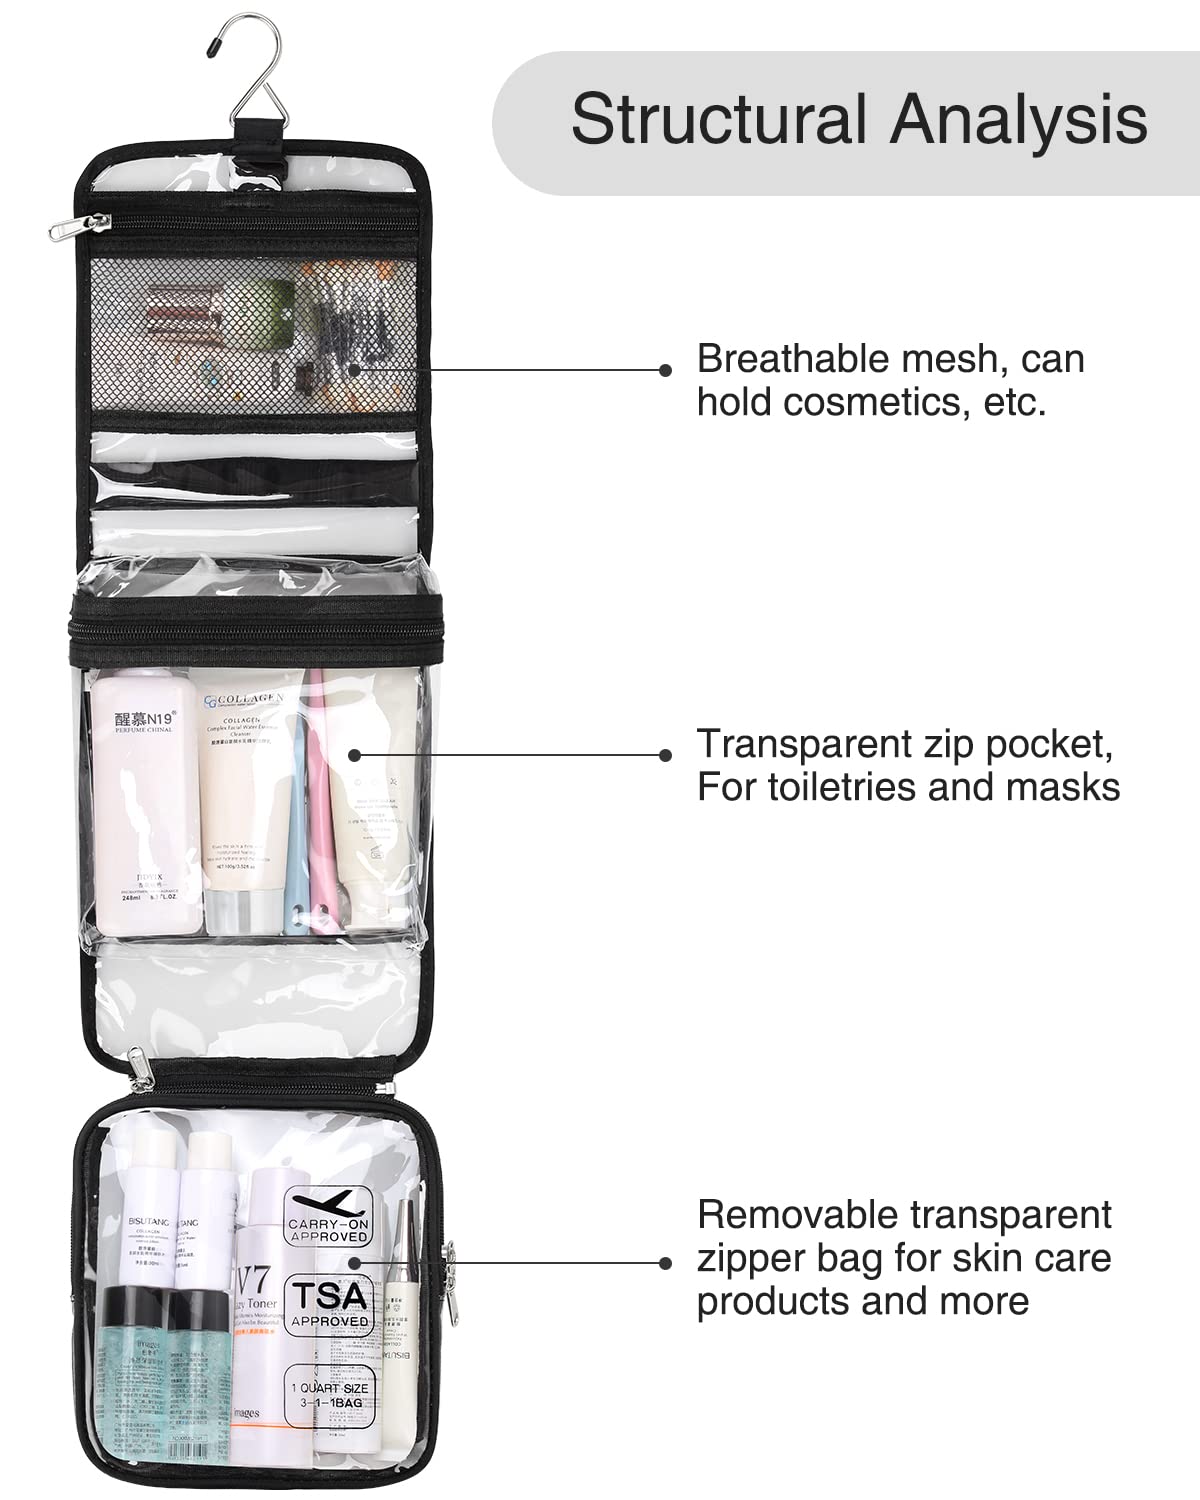 Hanging Toiletry Bag TSA Approved Clear Toiletry Bag for Women and Men 2 in 1 Removable TSA Liquids Travel Bag Waterproof Carry On Airline 3-1-1 Compliant Bag Quart Sized Luggage Pouch (Clear)